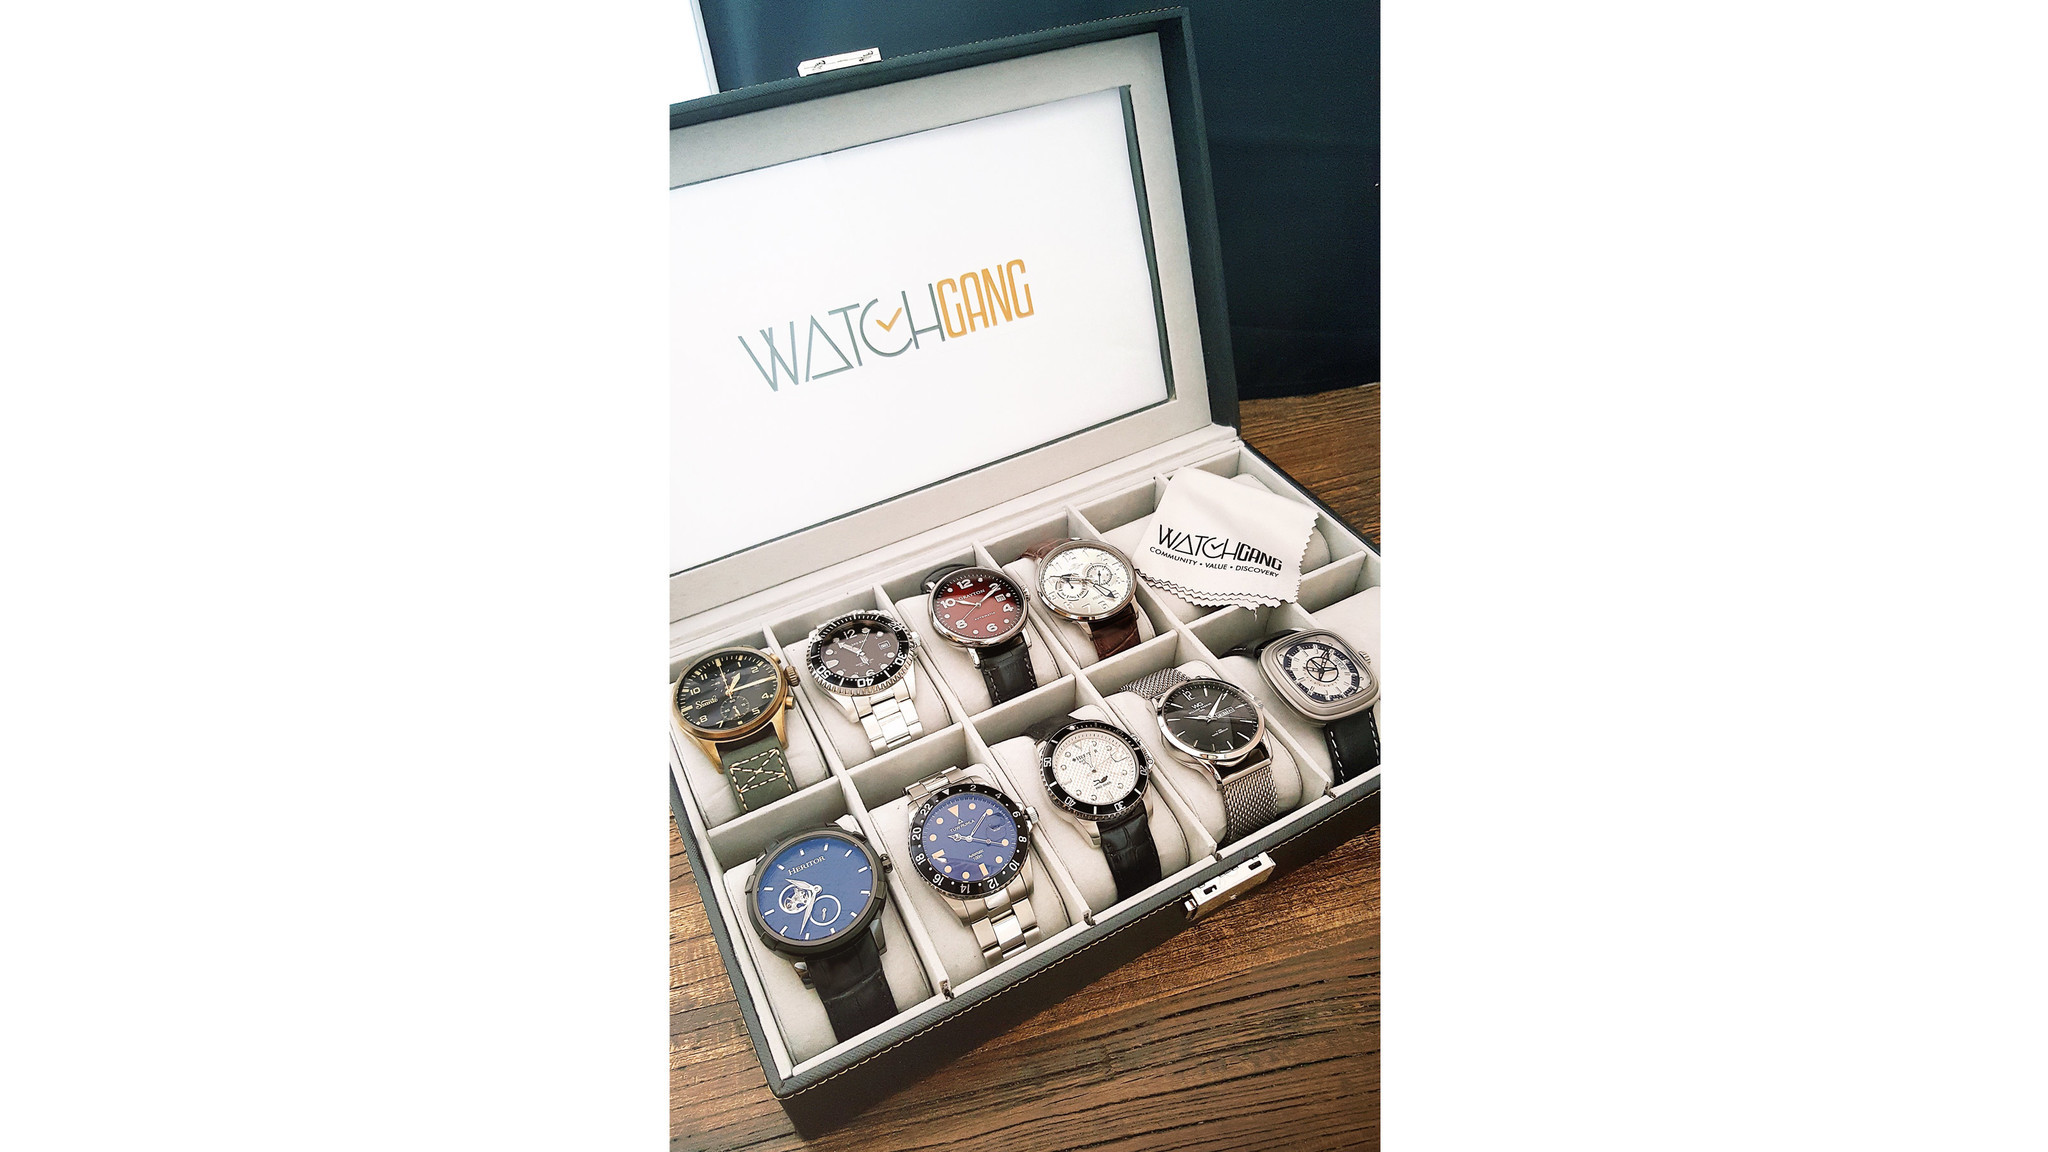 Monthly watch deliveries from Watch Gang.